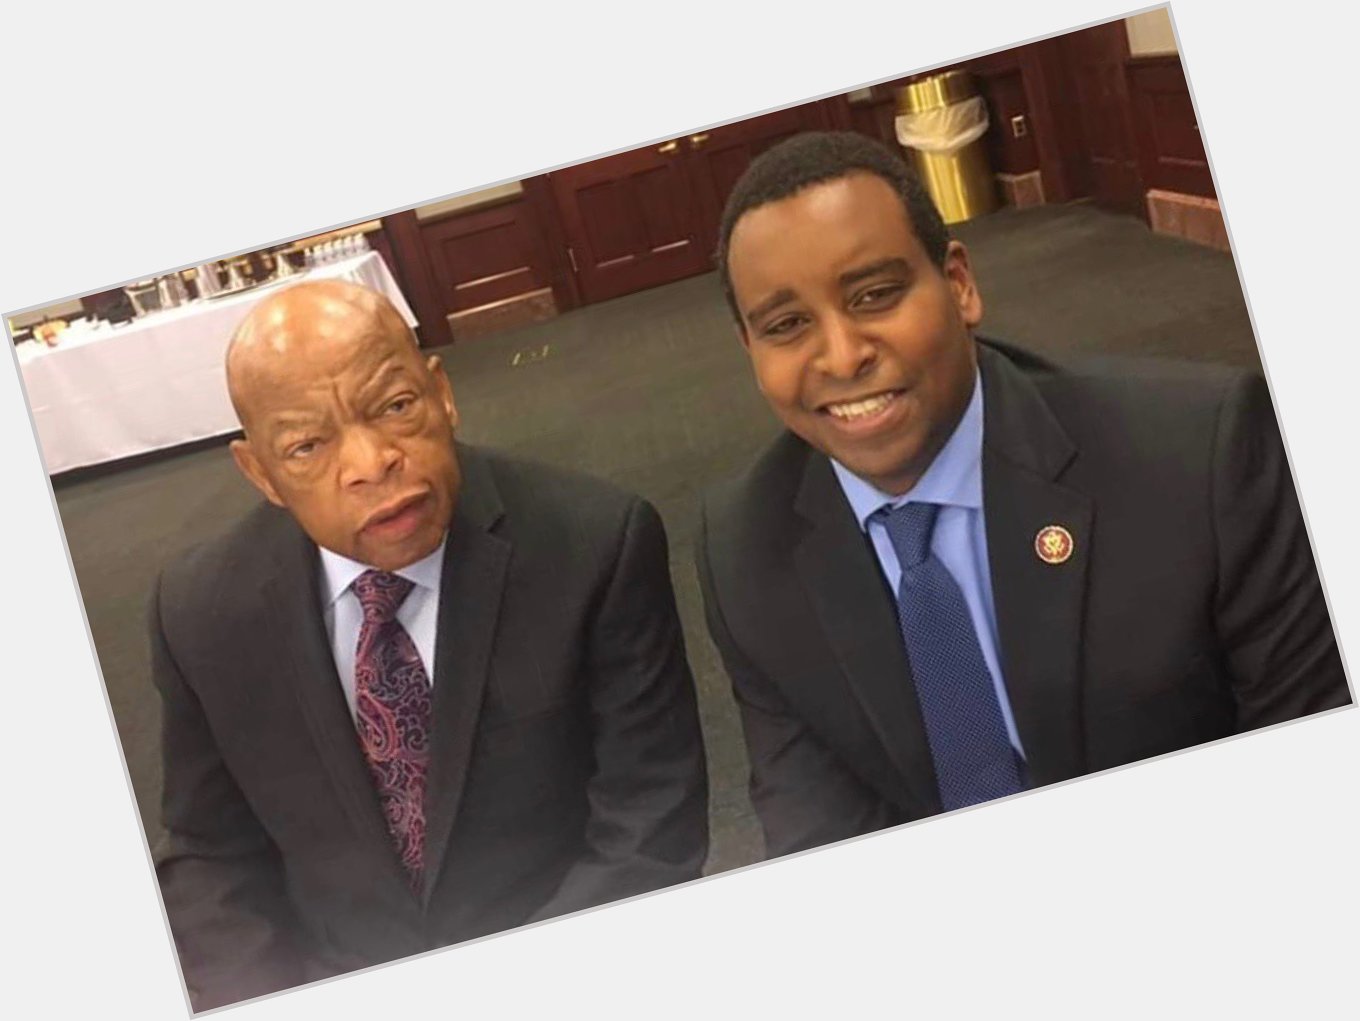 Happy birthday to our dear friend, and a giant among giants, John Lewis. 

We miss you John. 